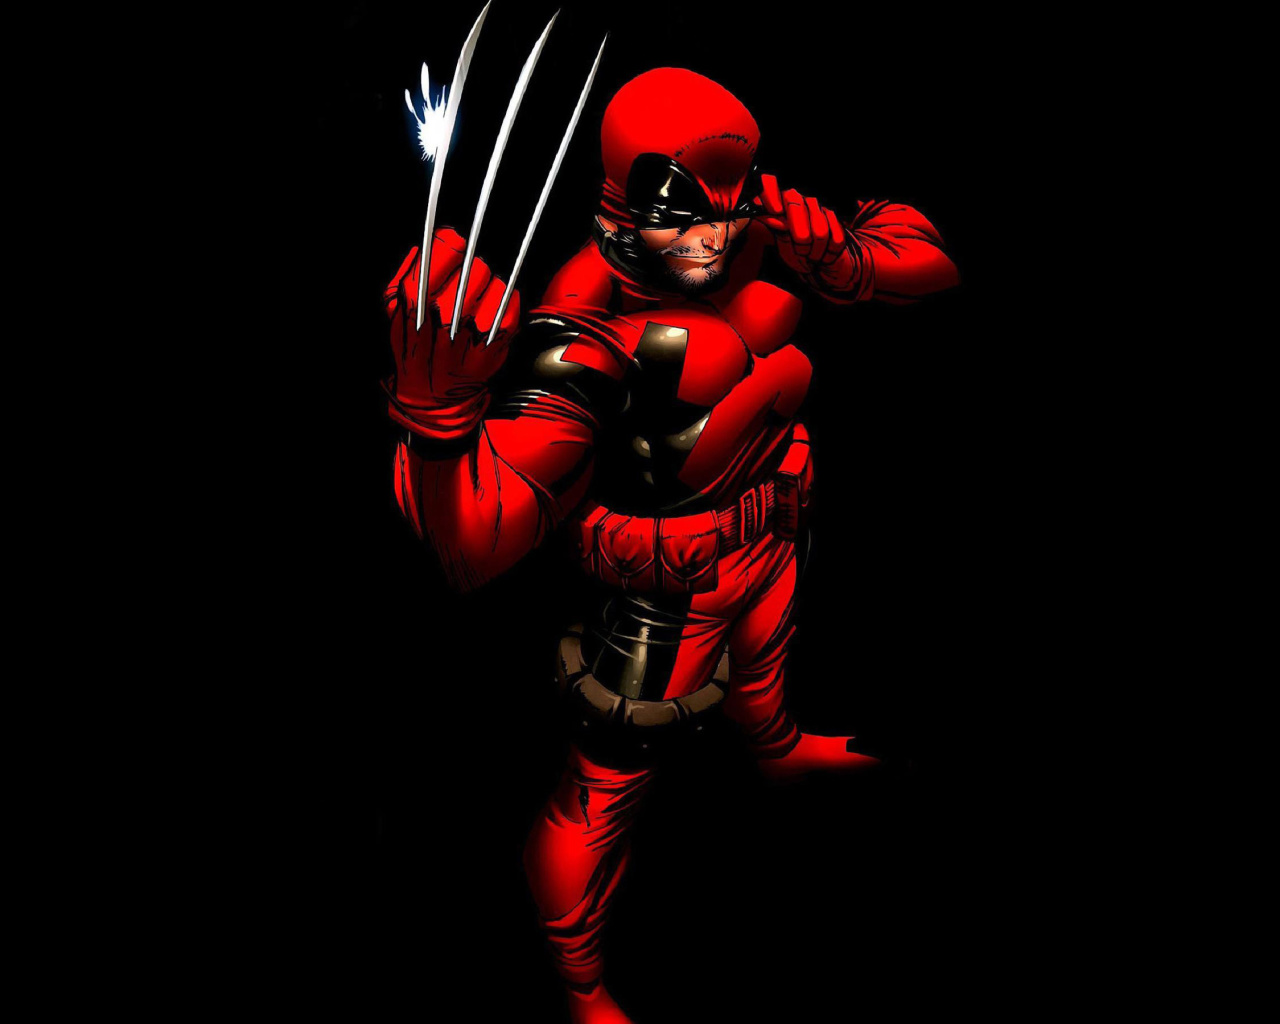 Wolverine in Red Costume wallpaper 1280x1024